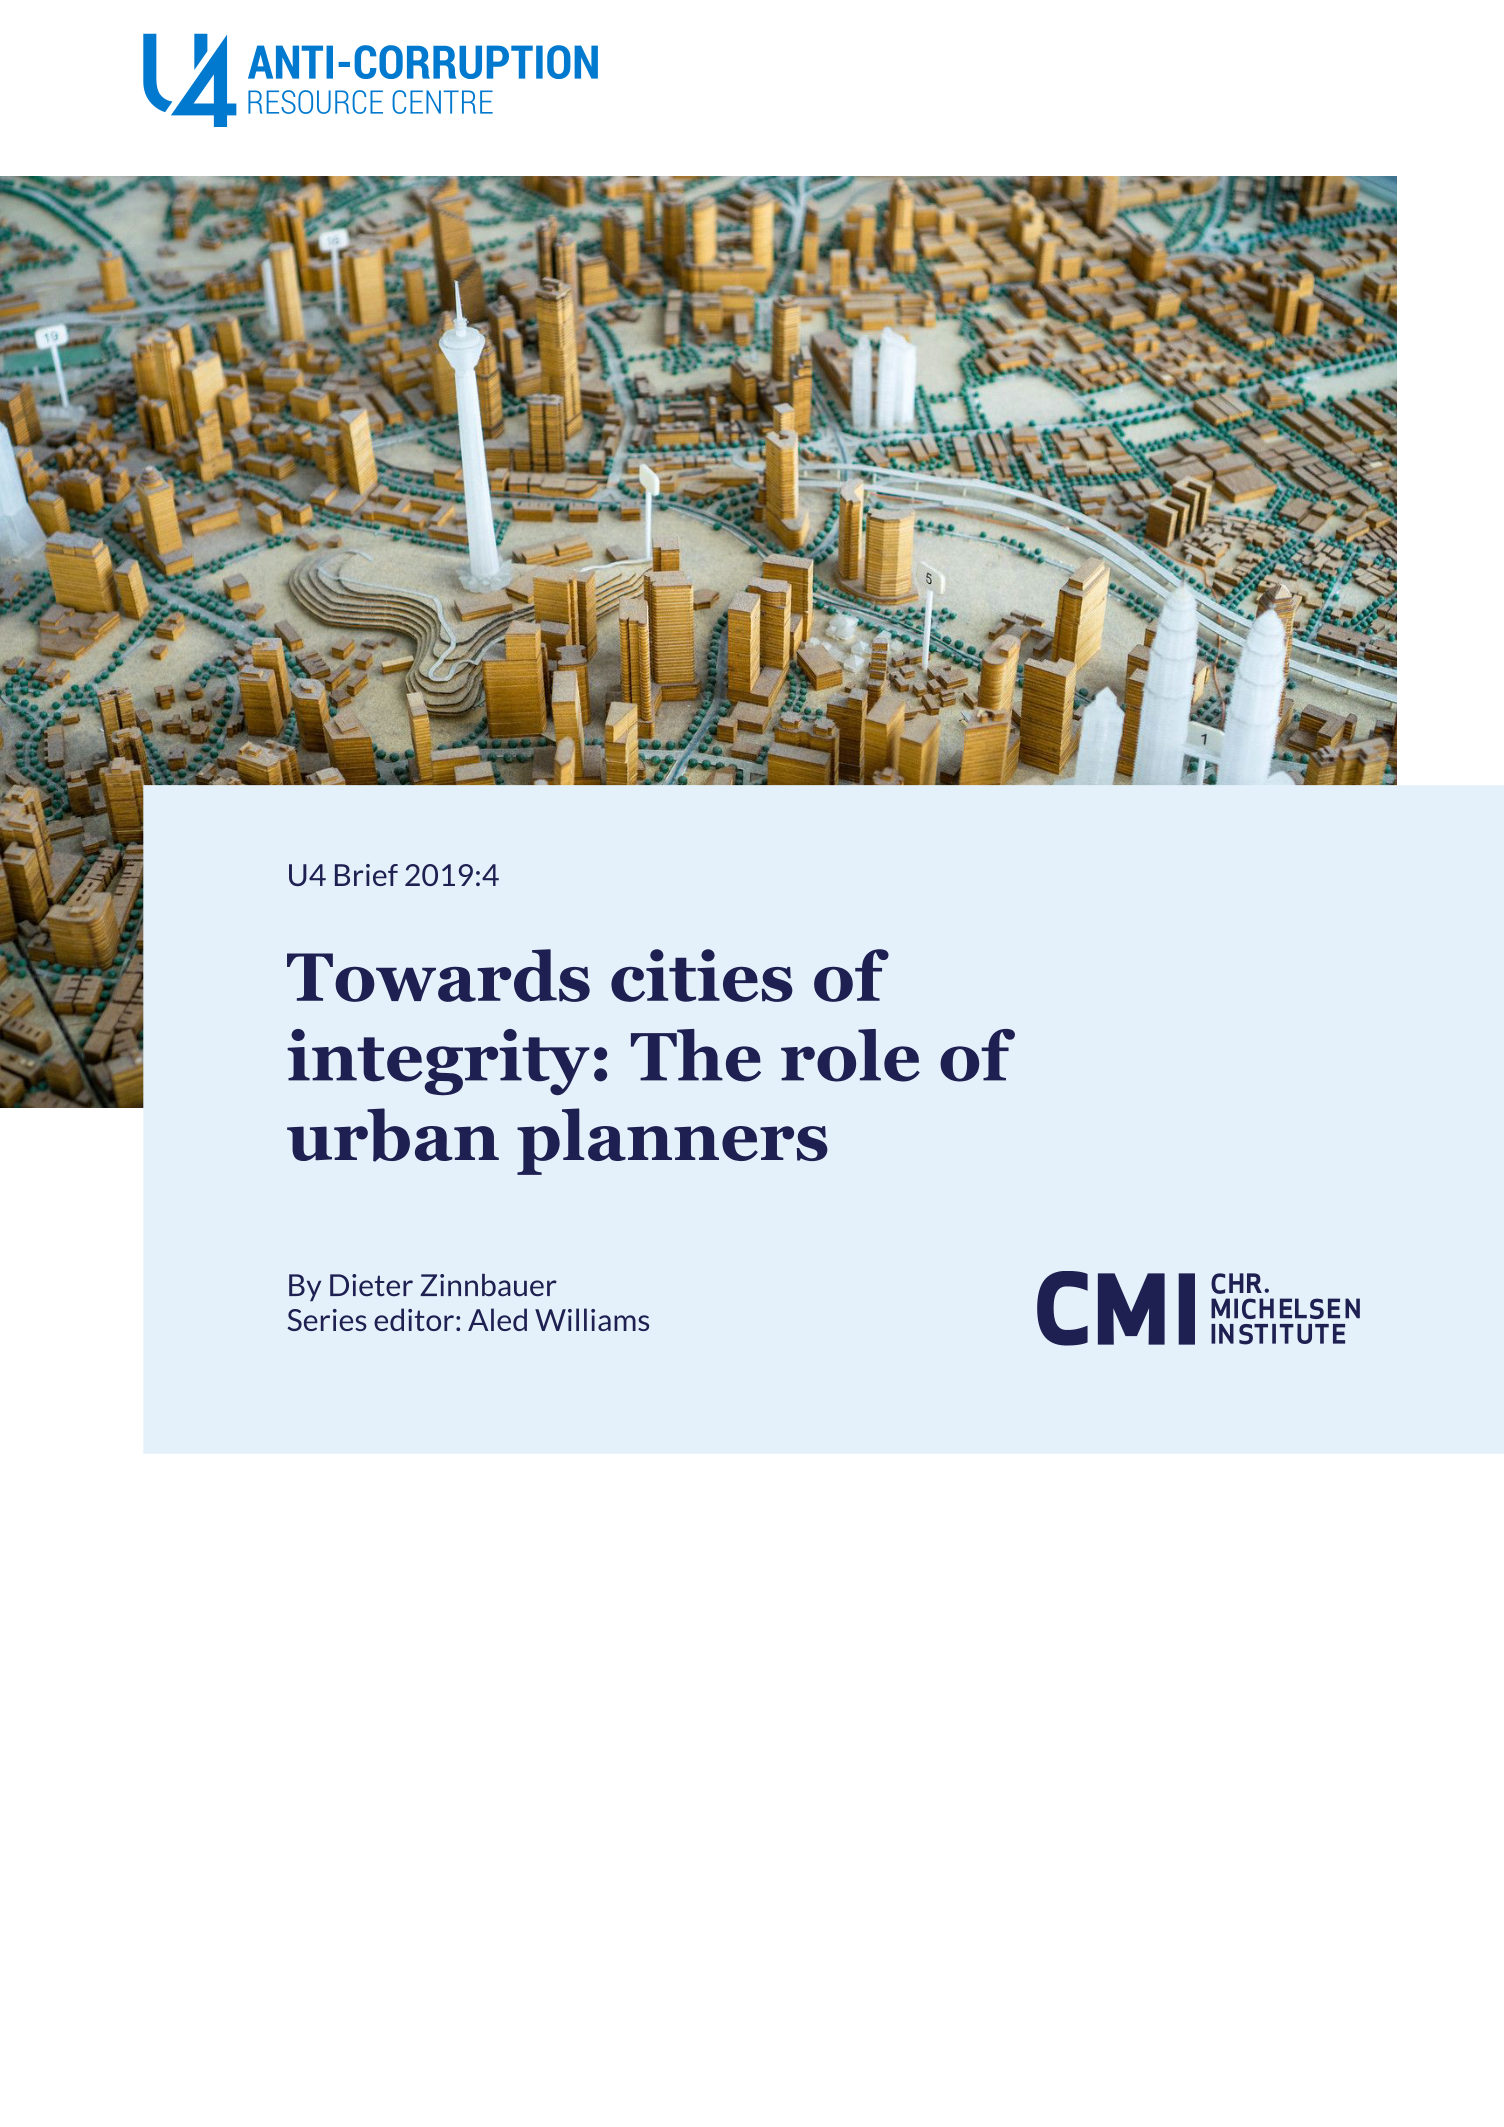 Towards cities of integrity: The role of urban planners